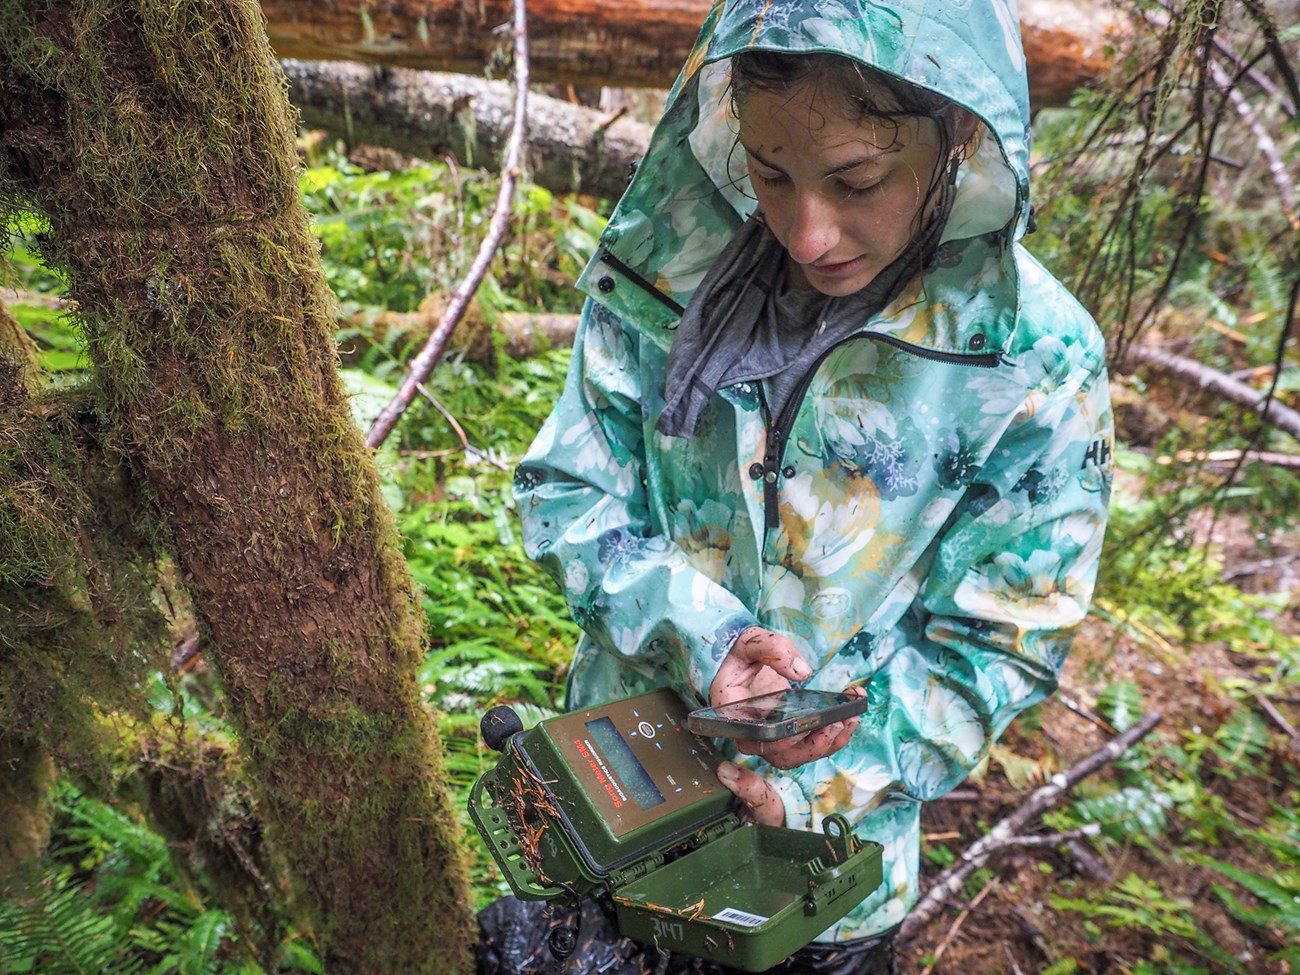 Woman in a patterned rain jacket examines an open plastic recording unit in the forest, recording data on a smartphone.